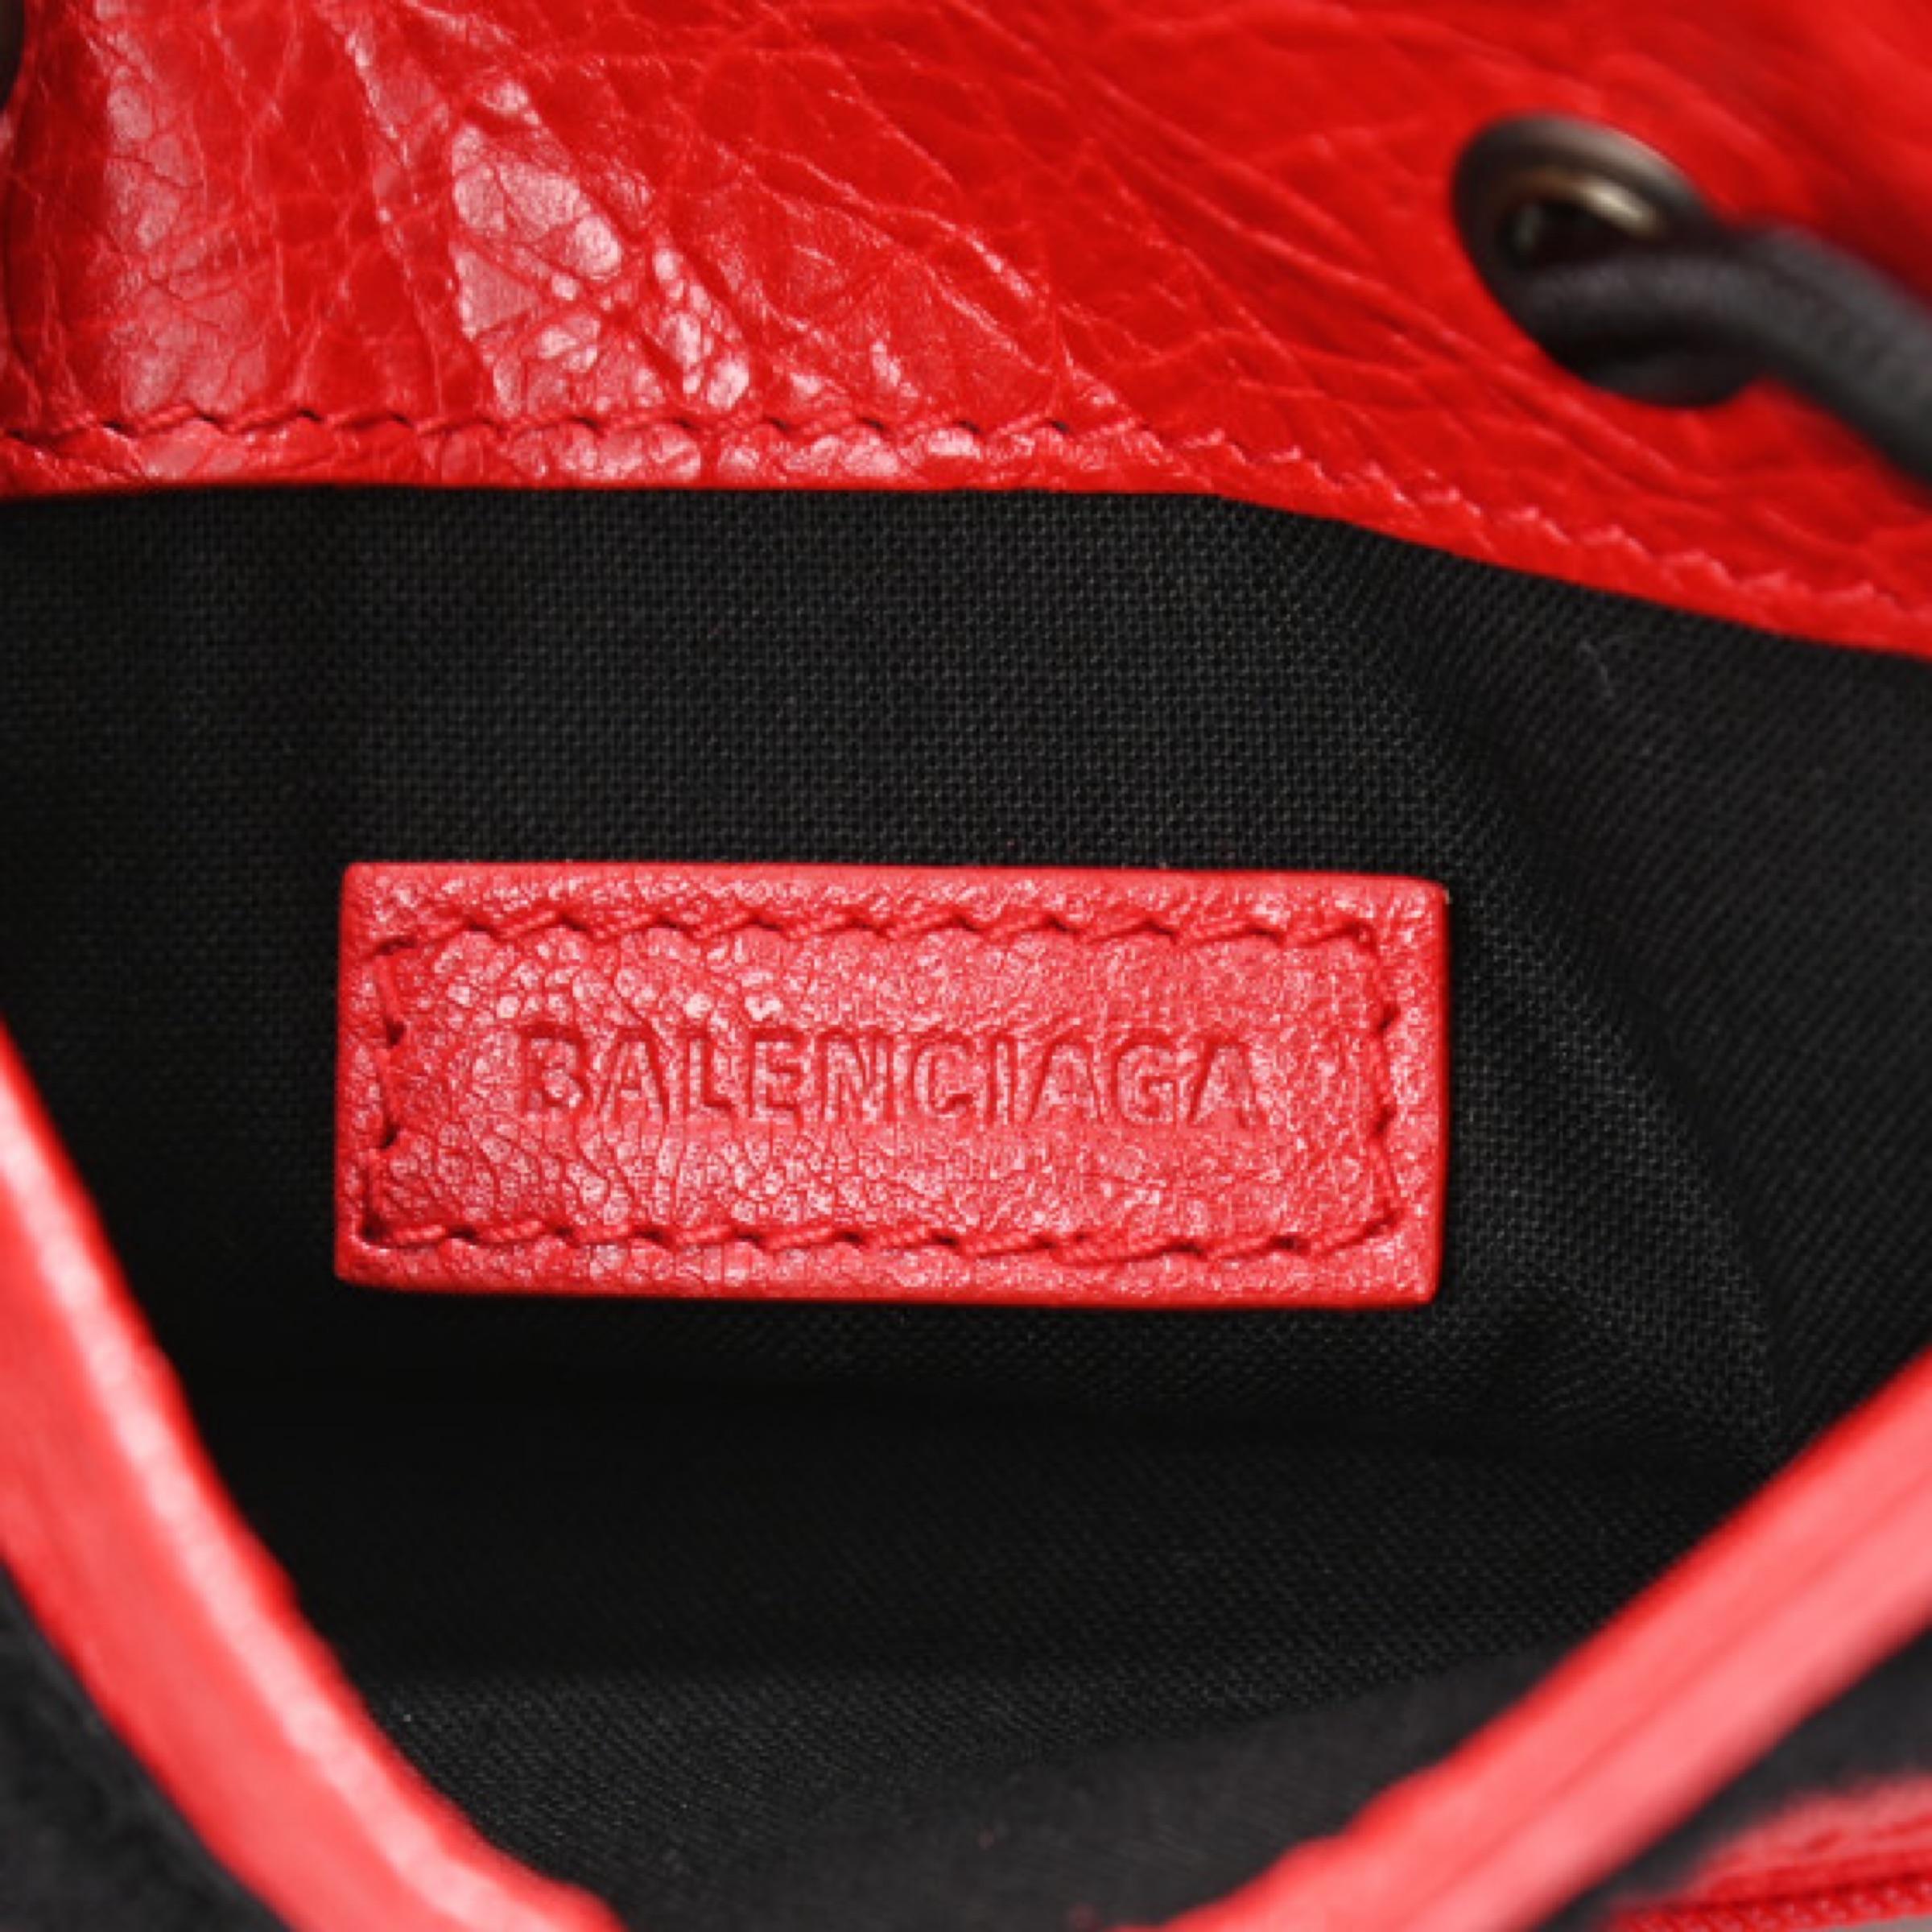 NEW Balenciaga Red Explorer Cracked Leather Pouch Crossbody Bag For Sale 8